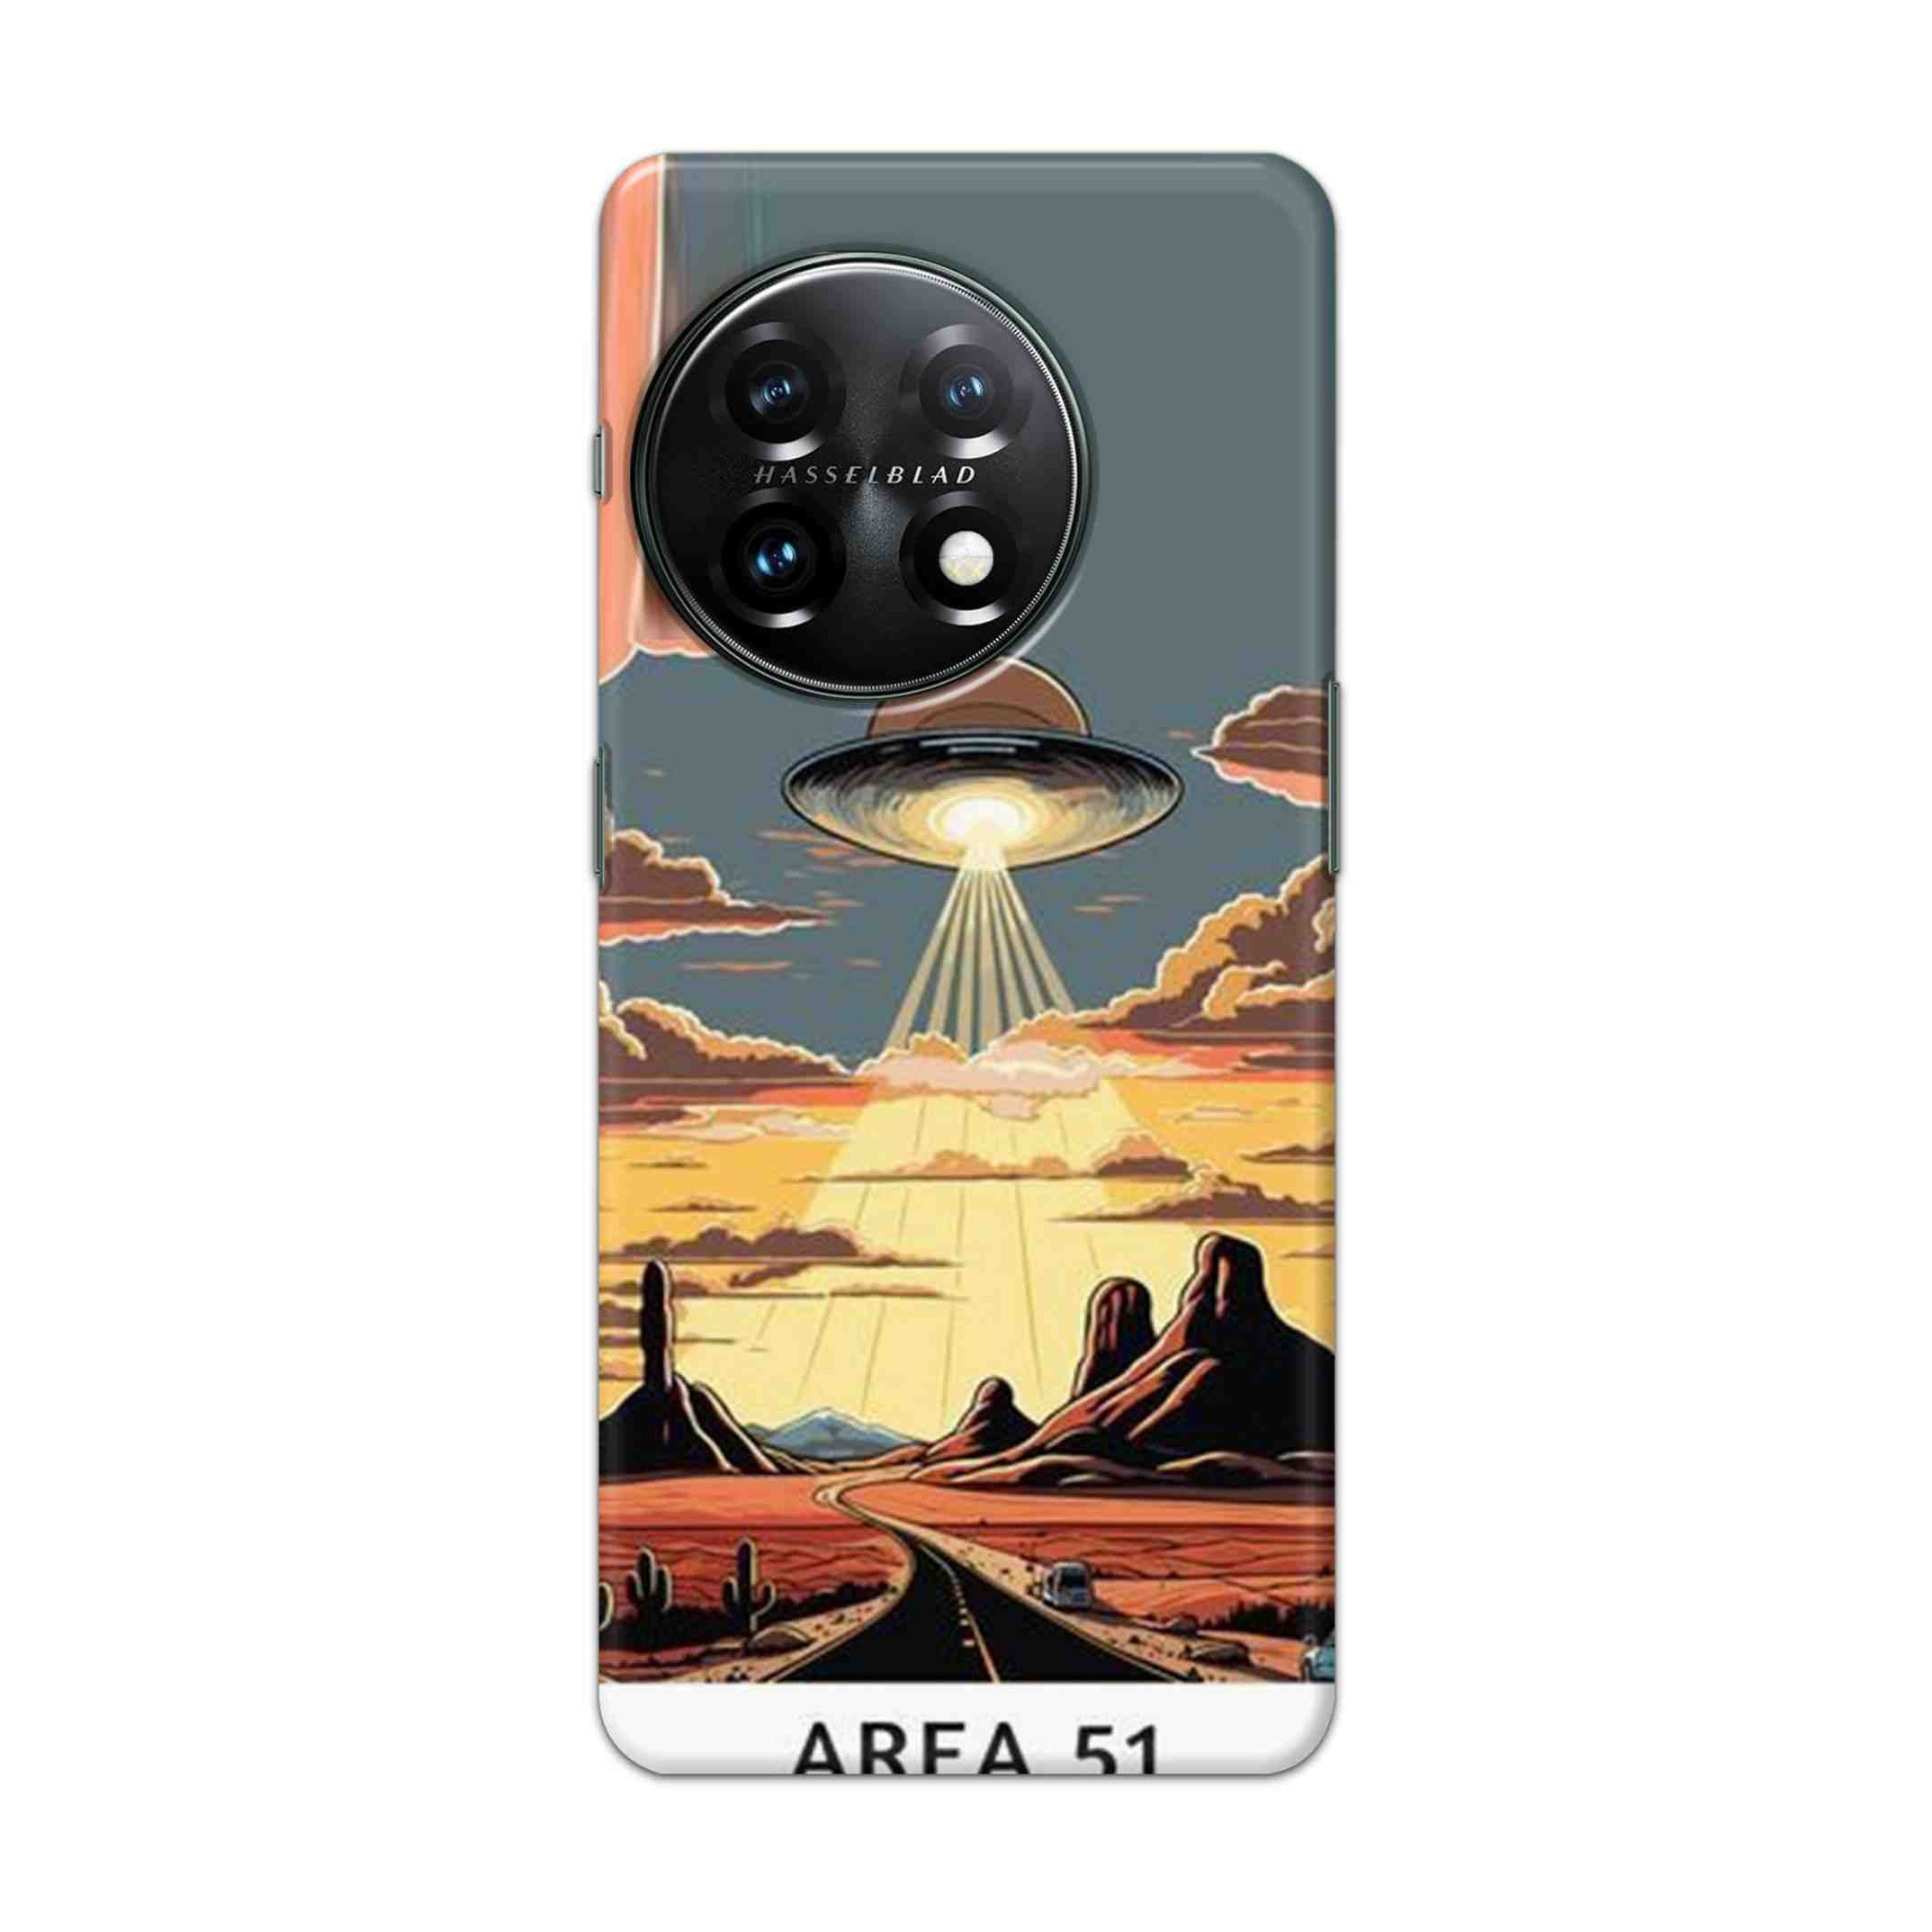 Buy Area 51 Hard Back Mobile Phone Case Cover For Oneplus 11 5G Online